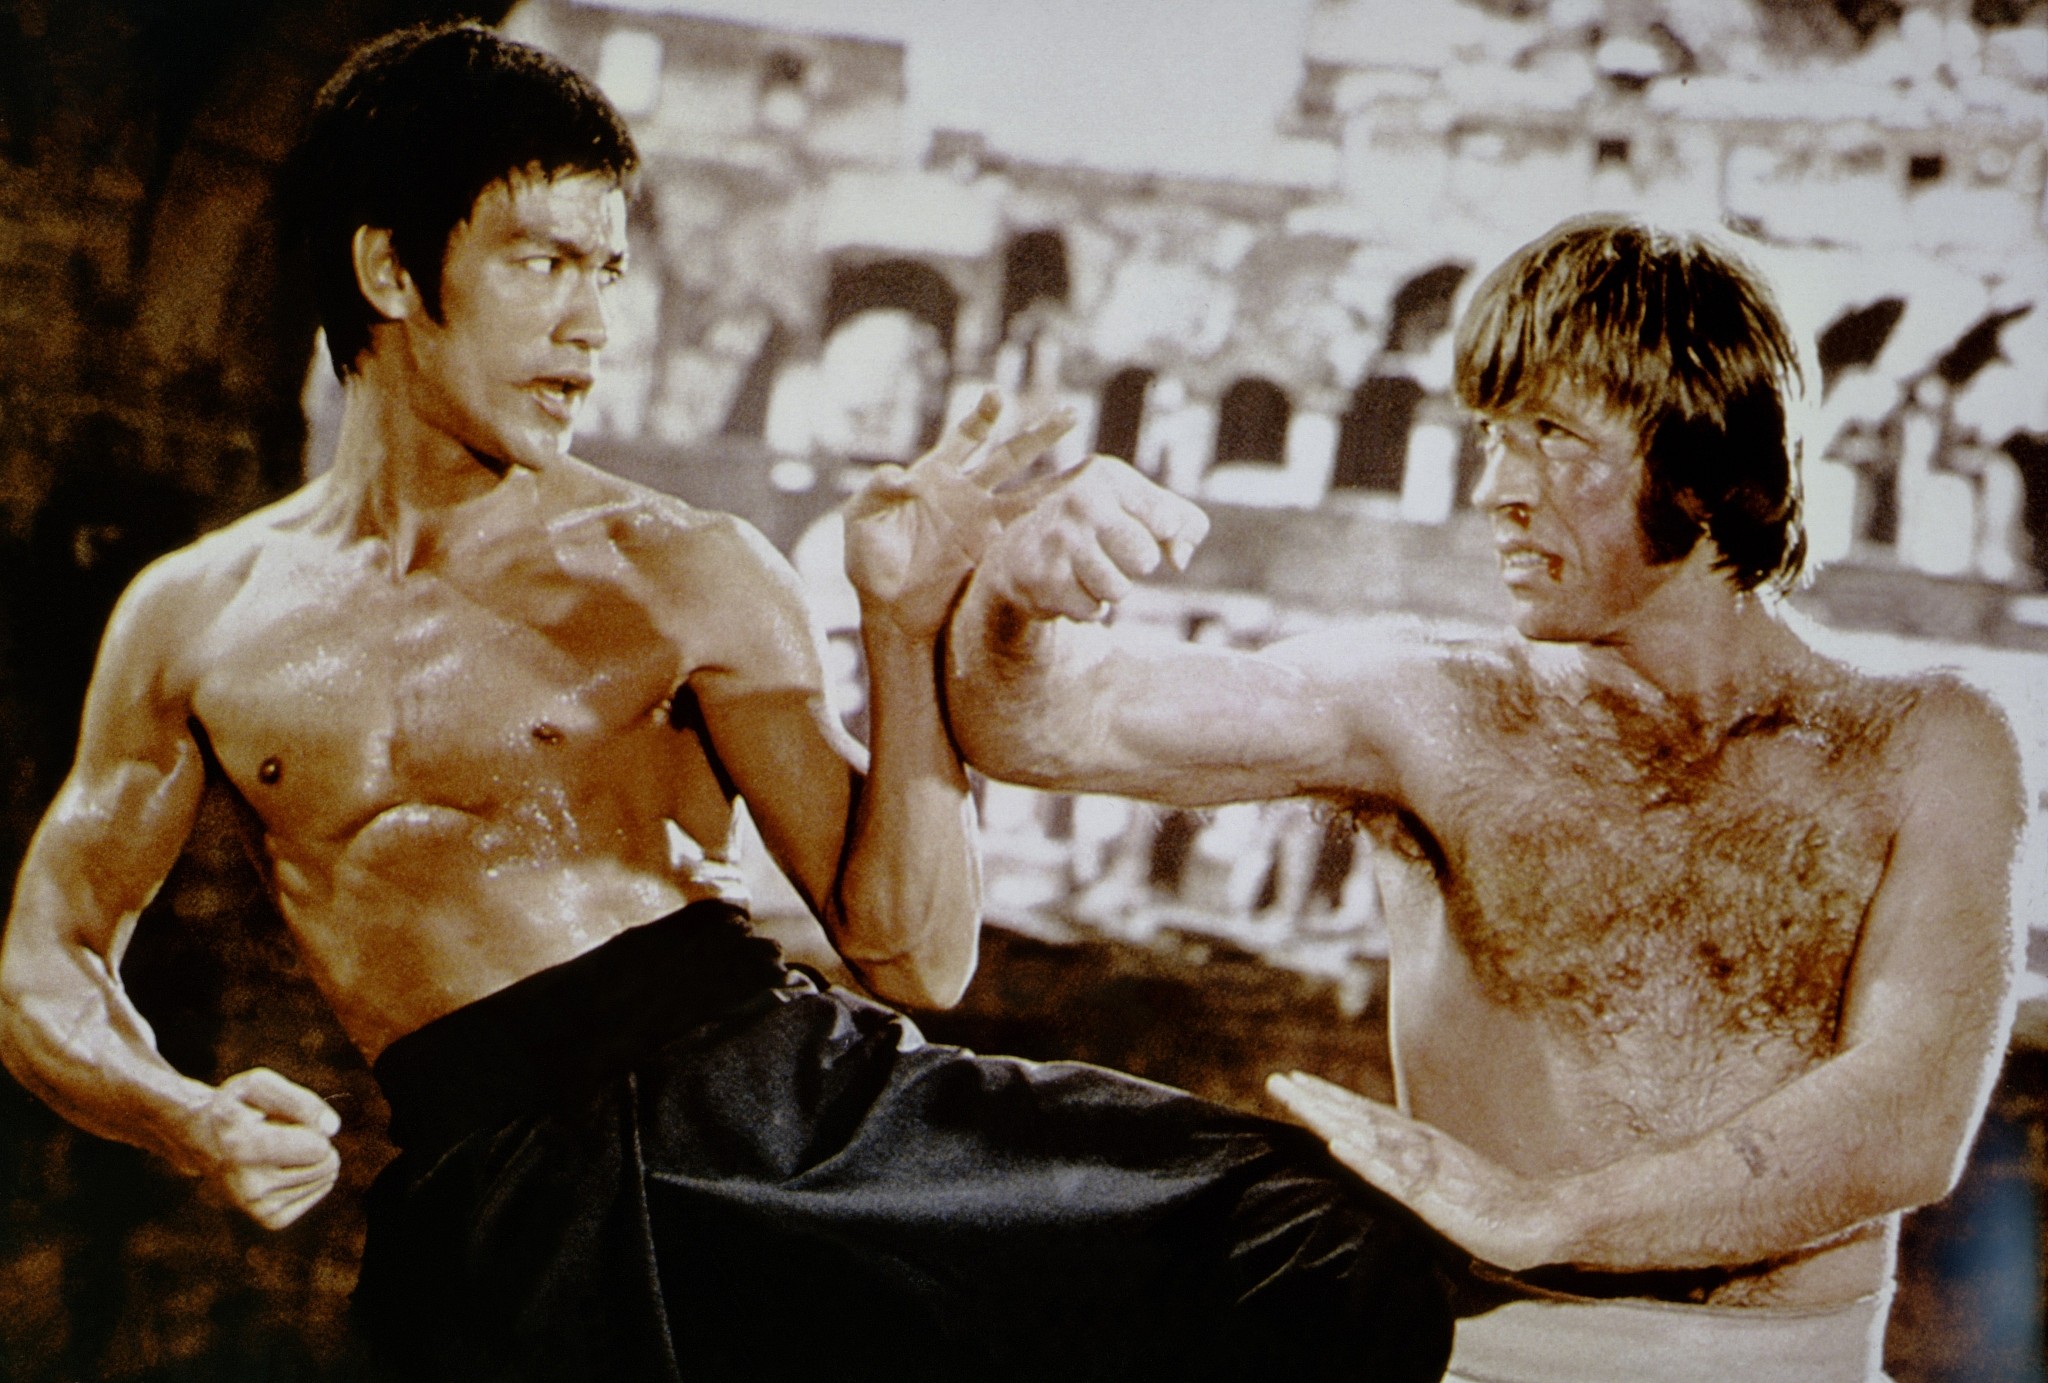 Bruce Lee with Chuck Norris in 'Way of the Dragon.' (Courtesy Matthew Polly)